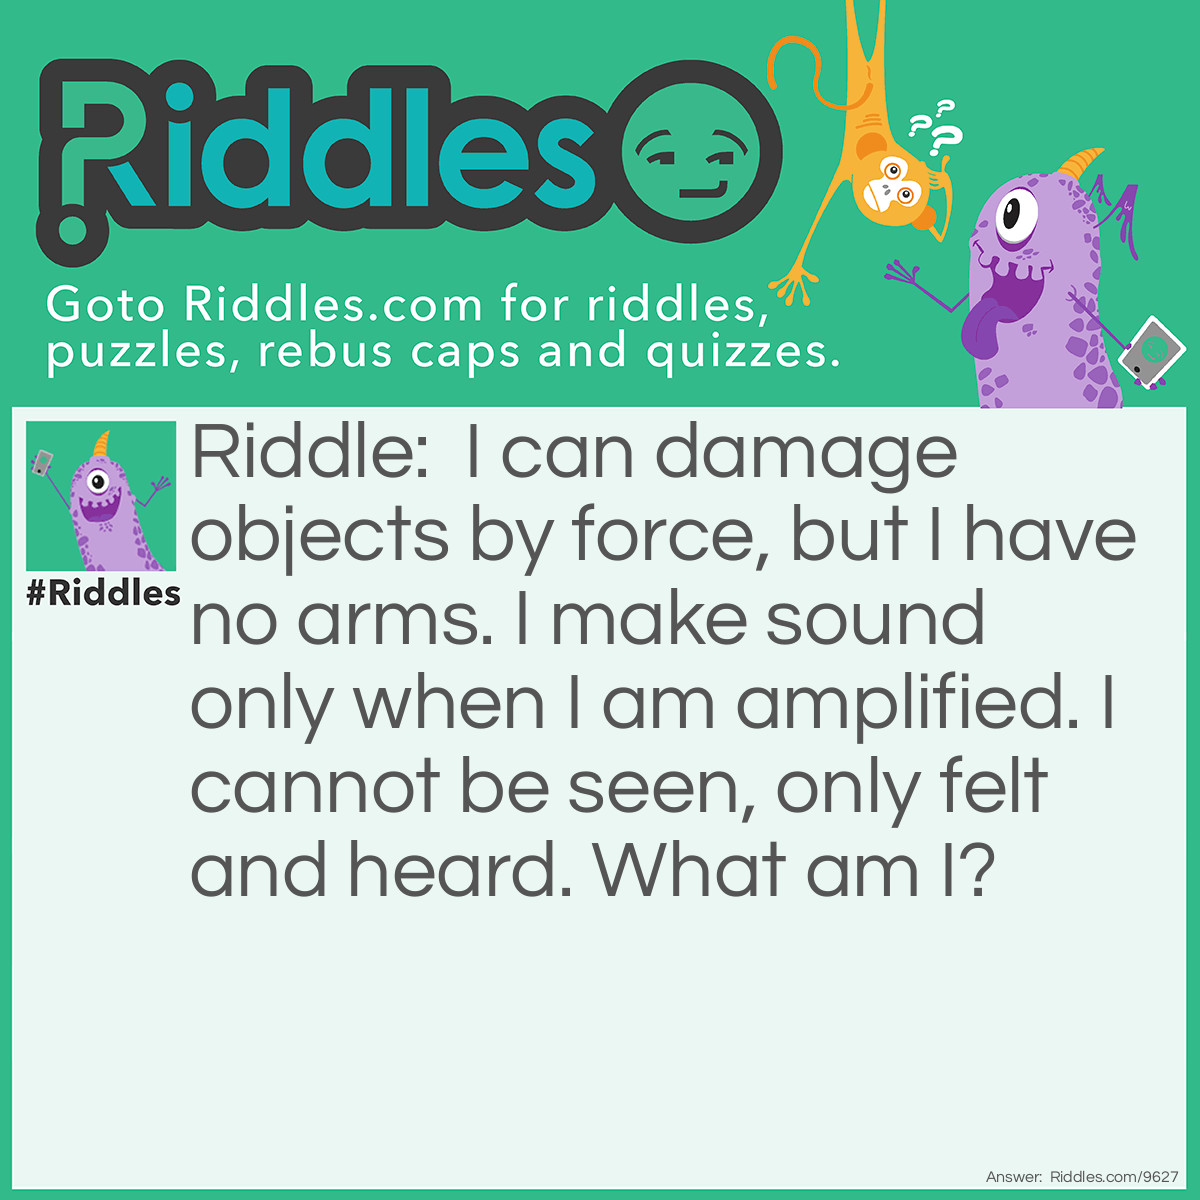 Riddle: I can damage objects by force, but I have no arms. I make sound only when I am amplified. I cannot be seen, only felt and heard. What am I? Answer: Wind.